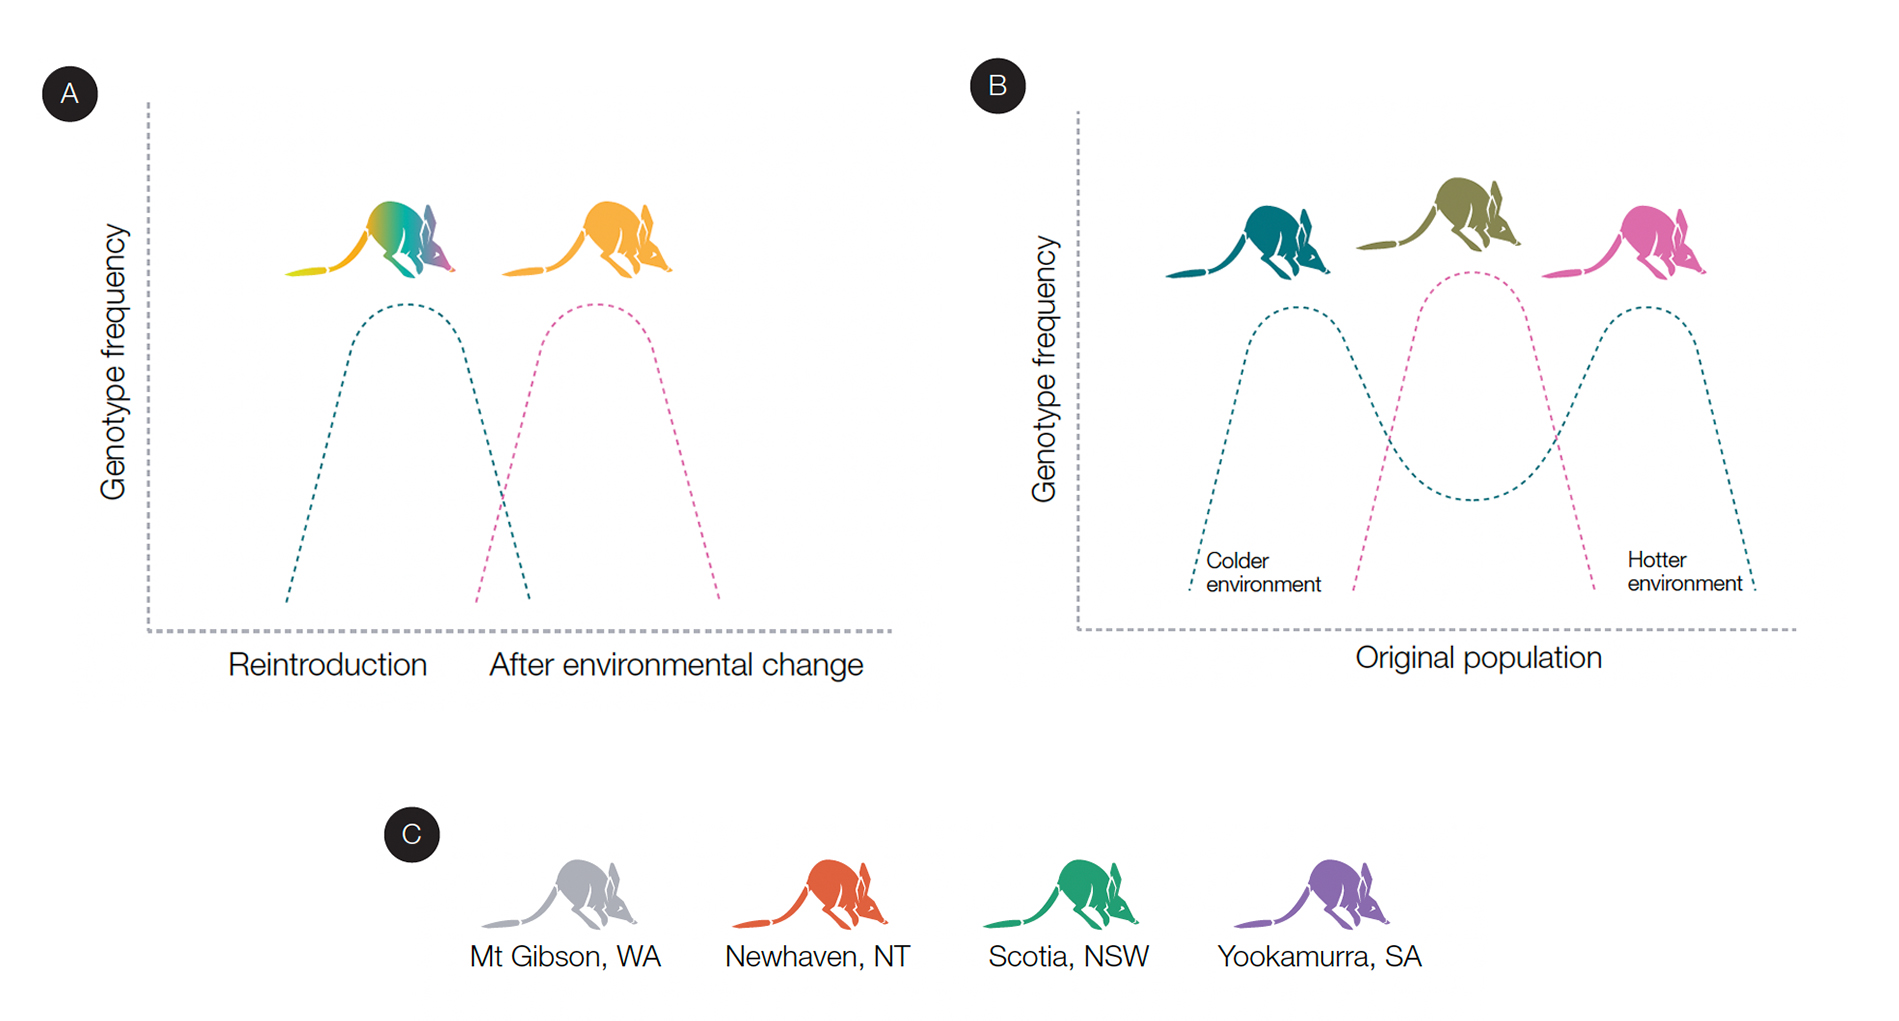 This simplified figure demonstrates how AWC’s Reintroduction Program aims to provide reintroduced species with evolutionary resilience into the future. A: Reintroducing genetically mixed individuals so that there might be a genotype that helps individuals or their offspring survive better in new conditions. B: Exposing species to different selection pressures (inherent at different locations and with varying climate change impacts) to maintain the range of genetically based phenotypic variation. C: Reintroducing the same species at different locations means that there are different ranges of genotypes across populations that could suit changed conditions.